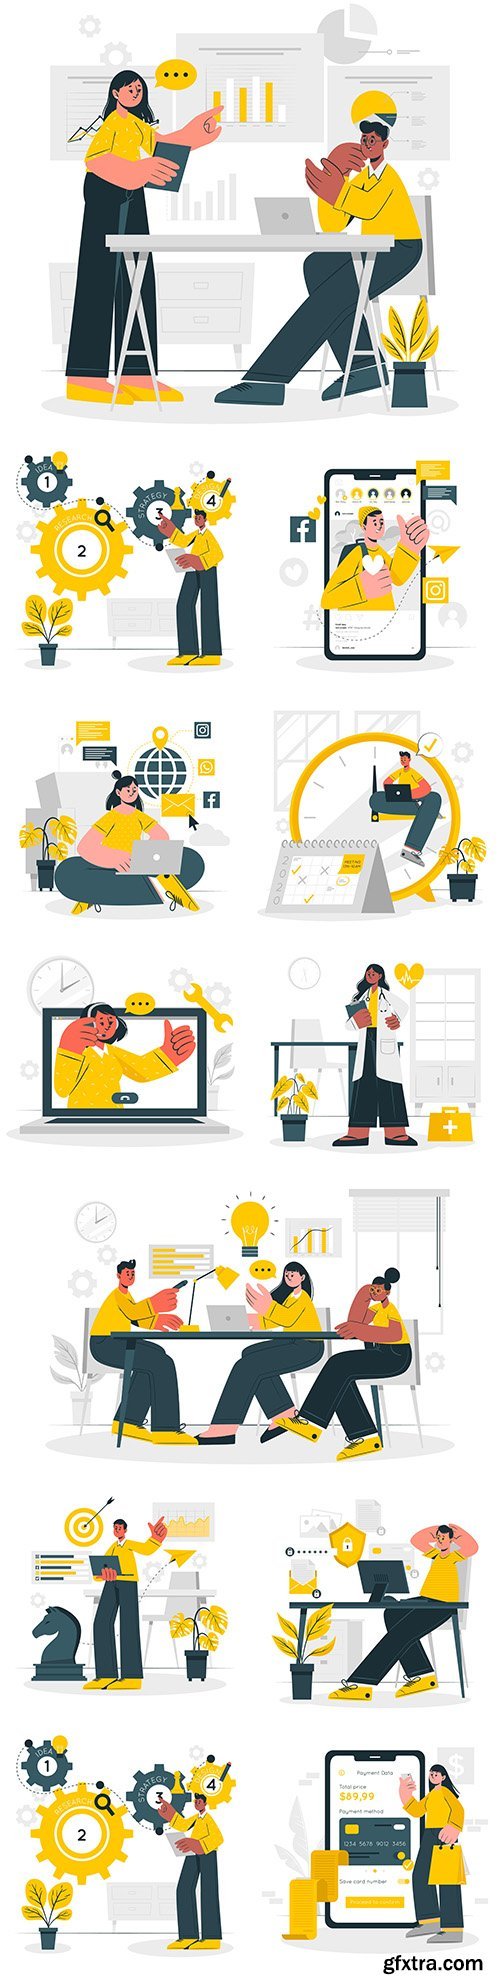 Business people and office work concept flat illustration